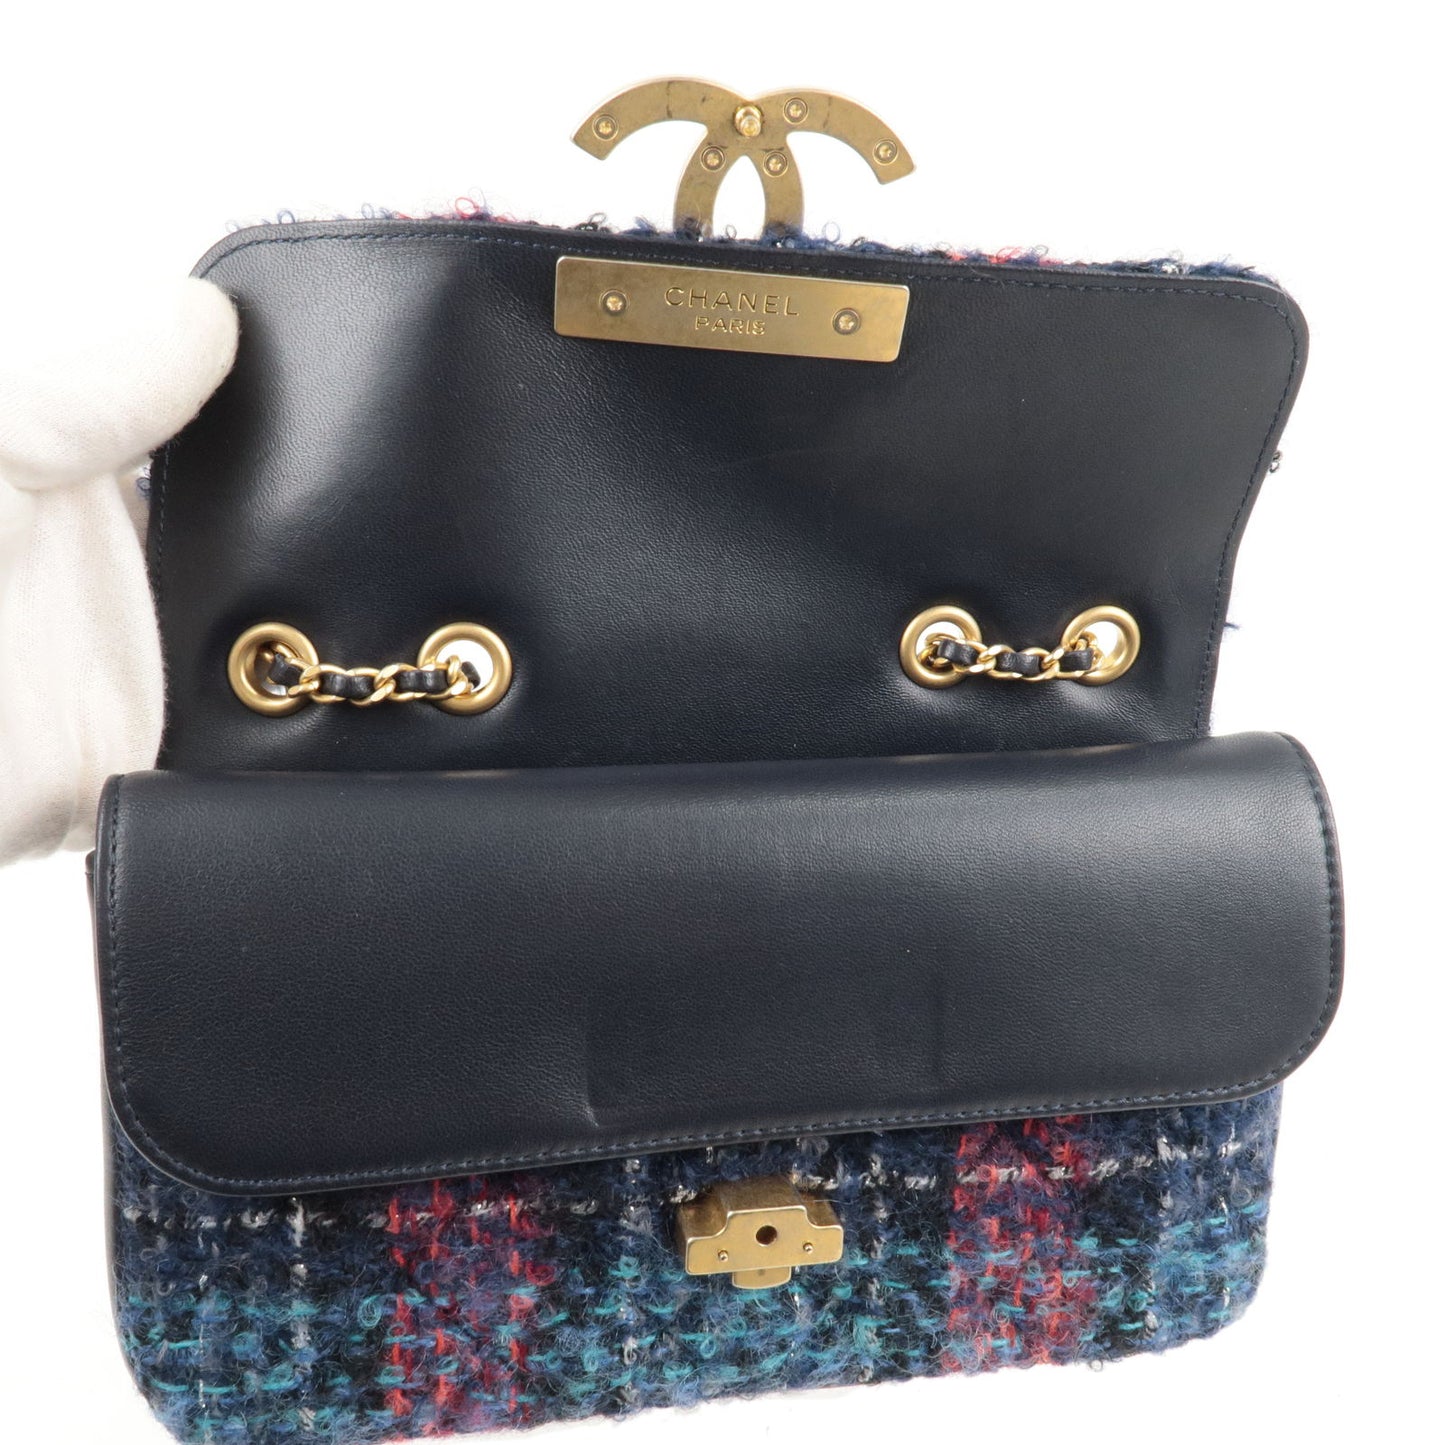 CHANEL Tweed Leather Double Flap Chain Shoulder Bag Navy